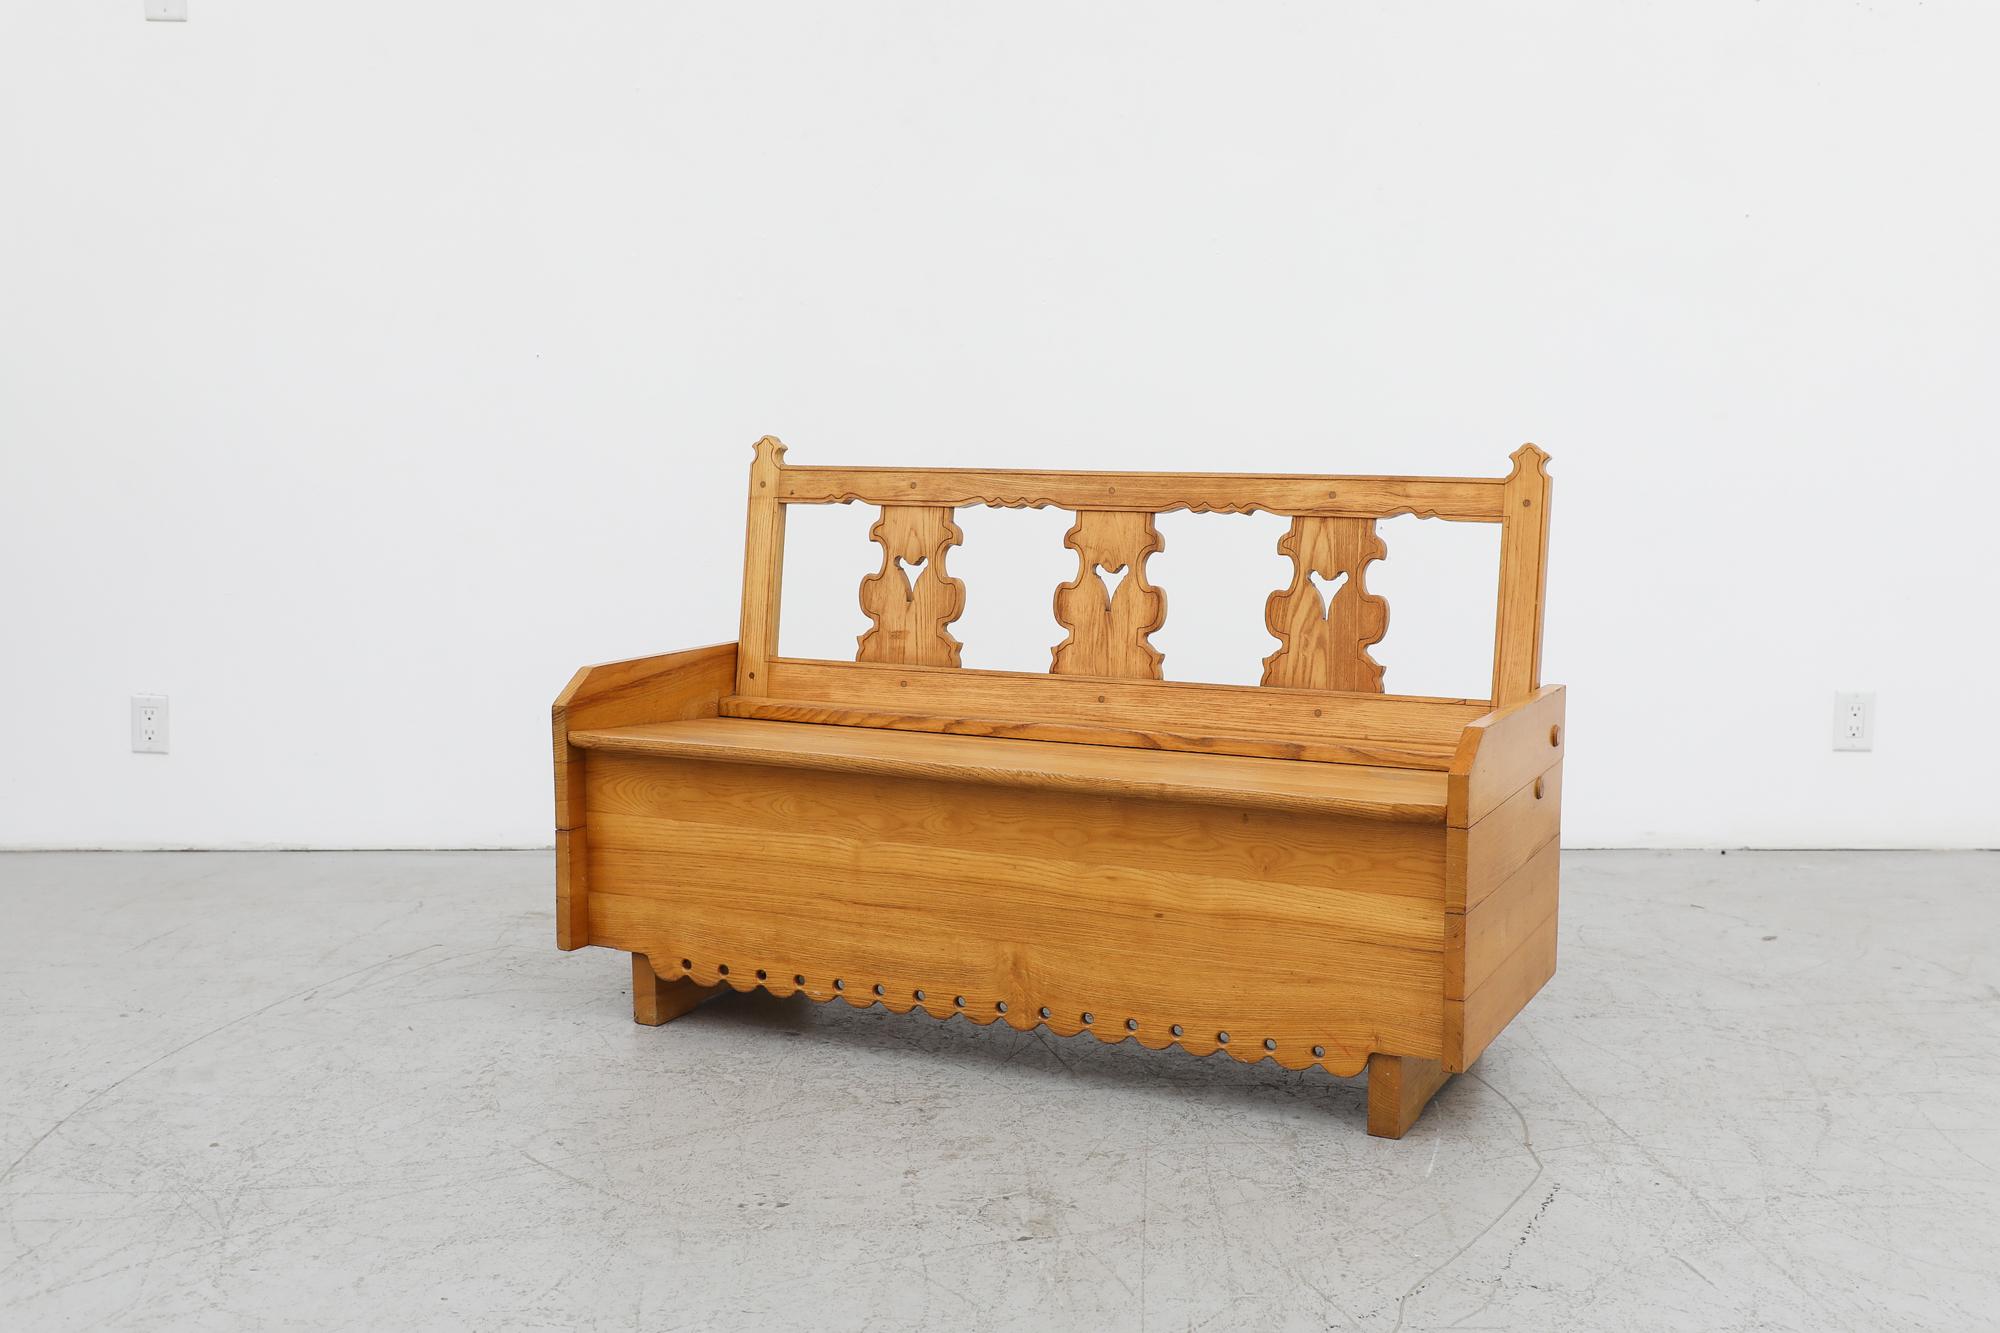 Mid-Century Tyrolean style ornate pine storage bench. This charming bench doubles as a blanket chest with beautiful ornate carvings throughout the piece. In original condition with visible wear consistent with its age and use.